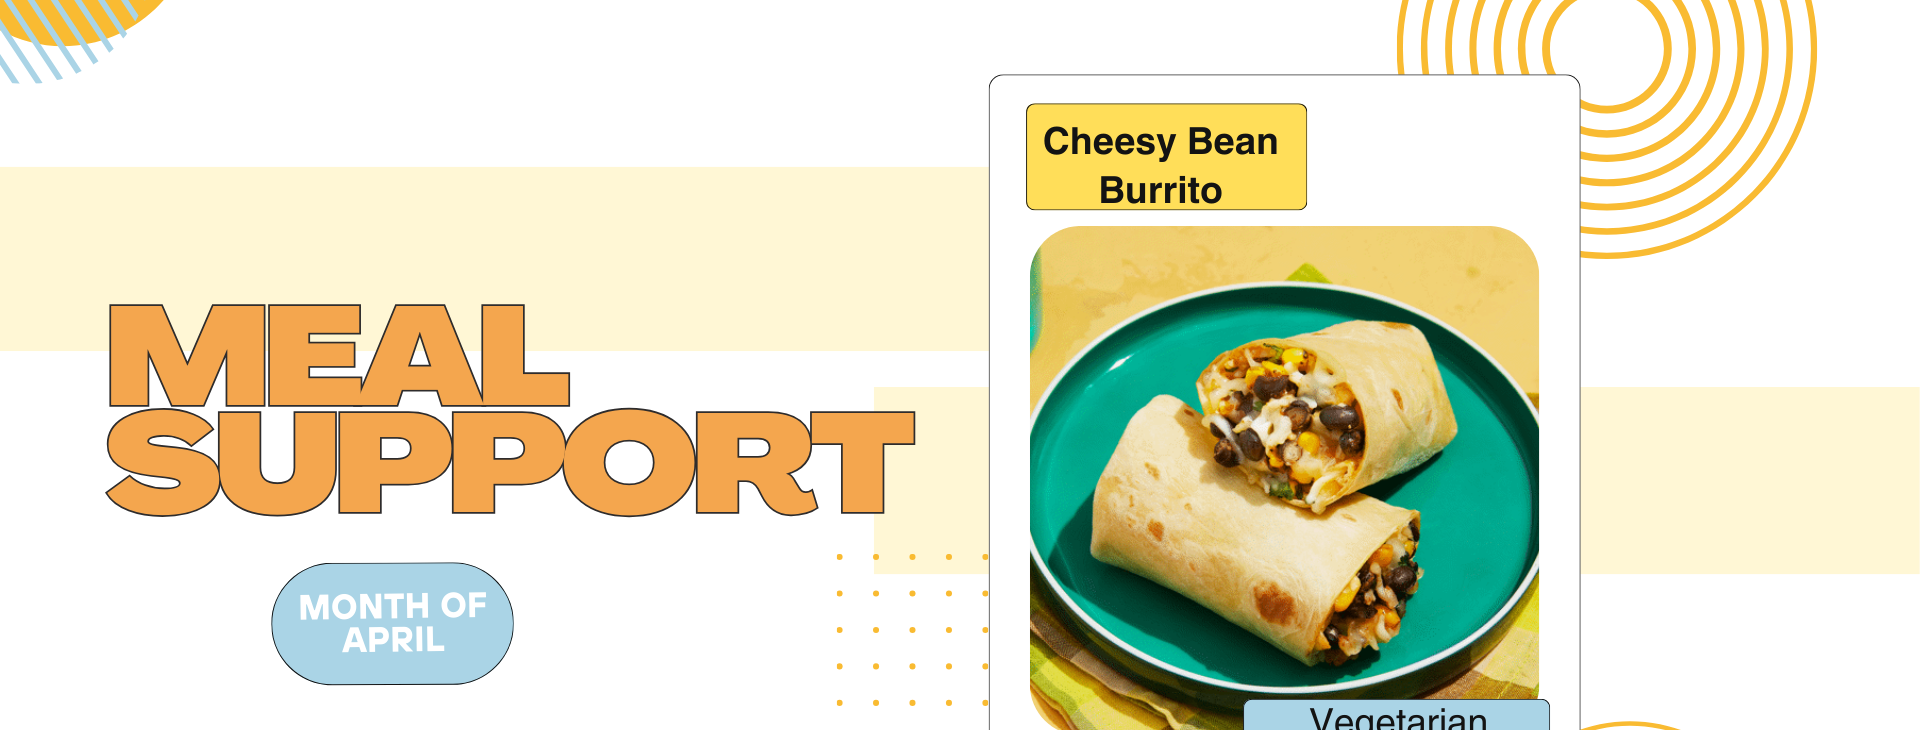 Meal Support- Cheesy Bean Burrito 